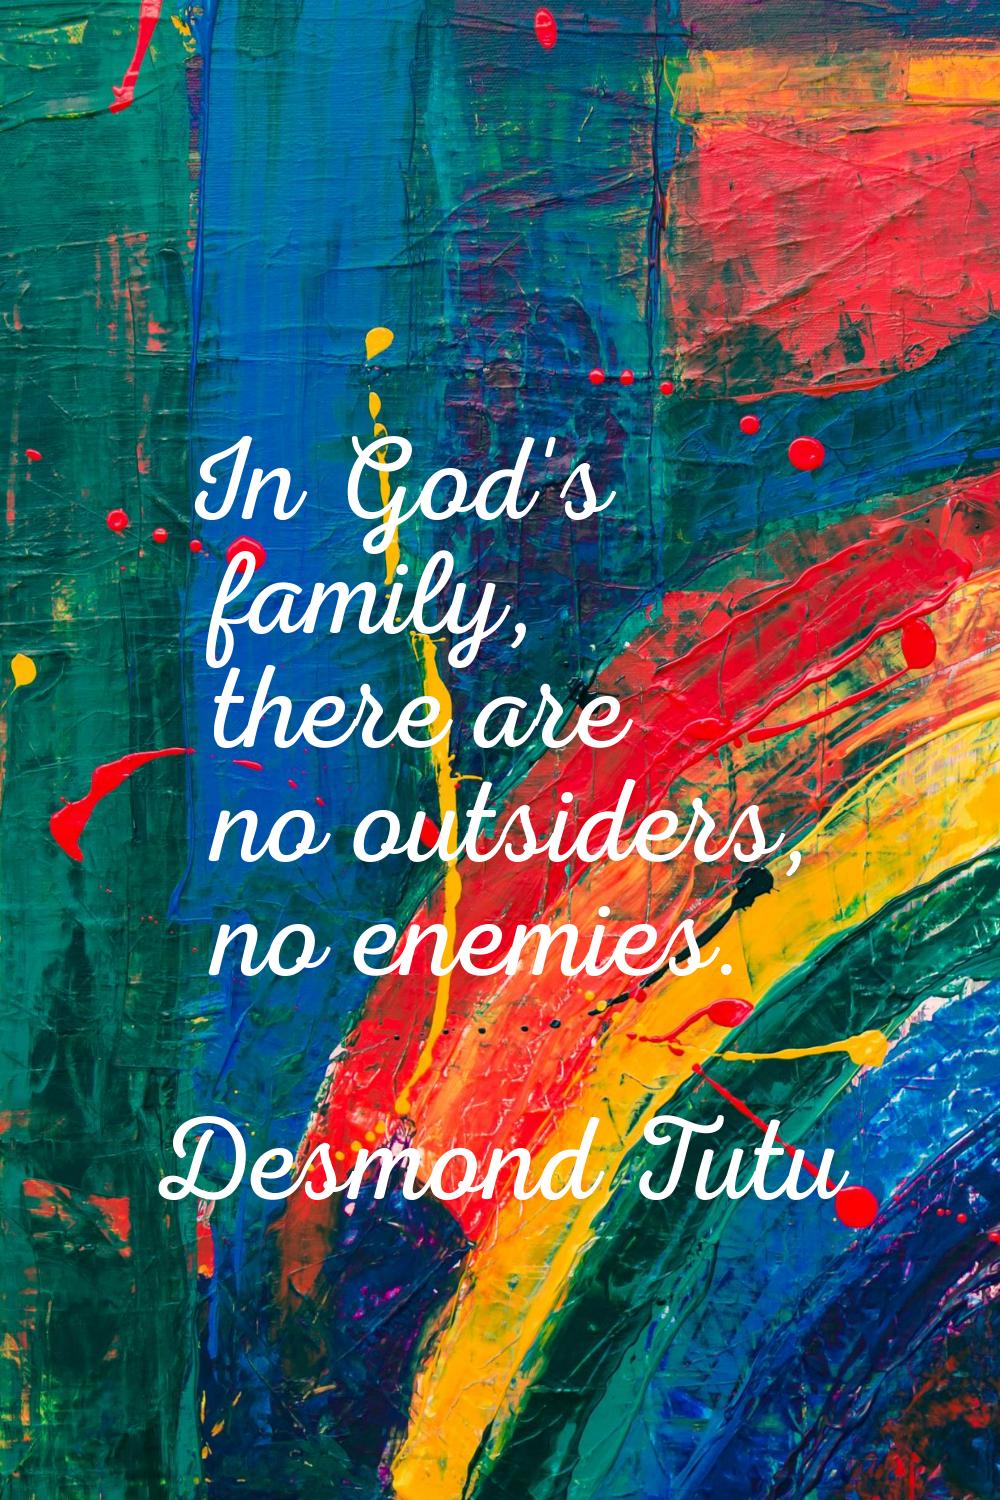 In God's family, there are no outsiders, no enemies.